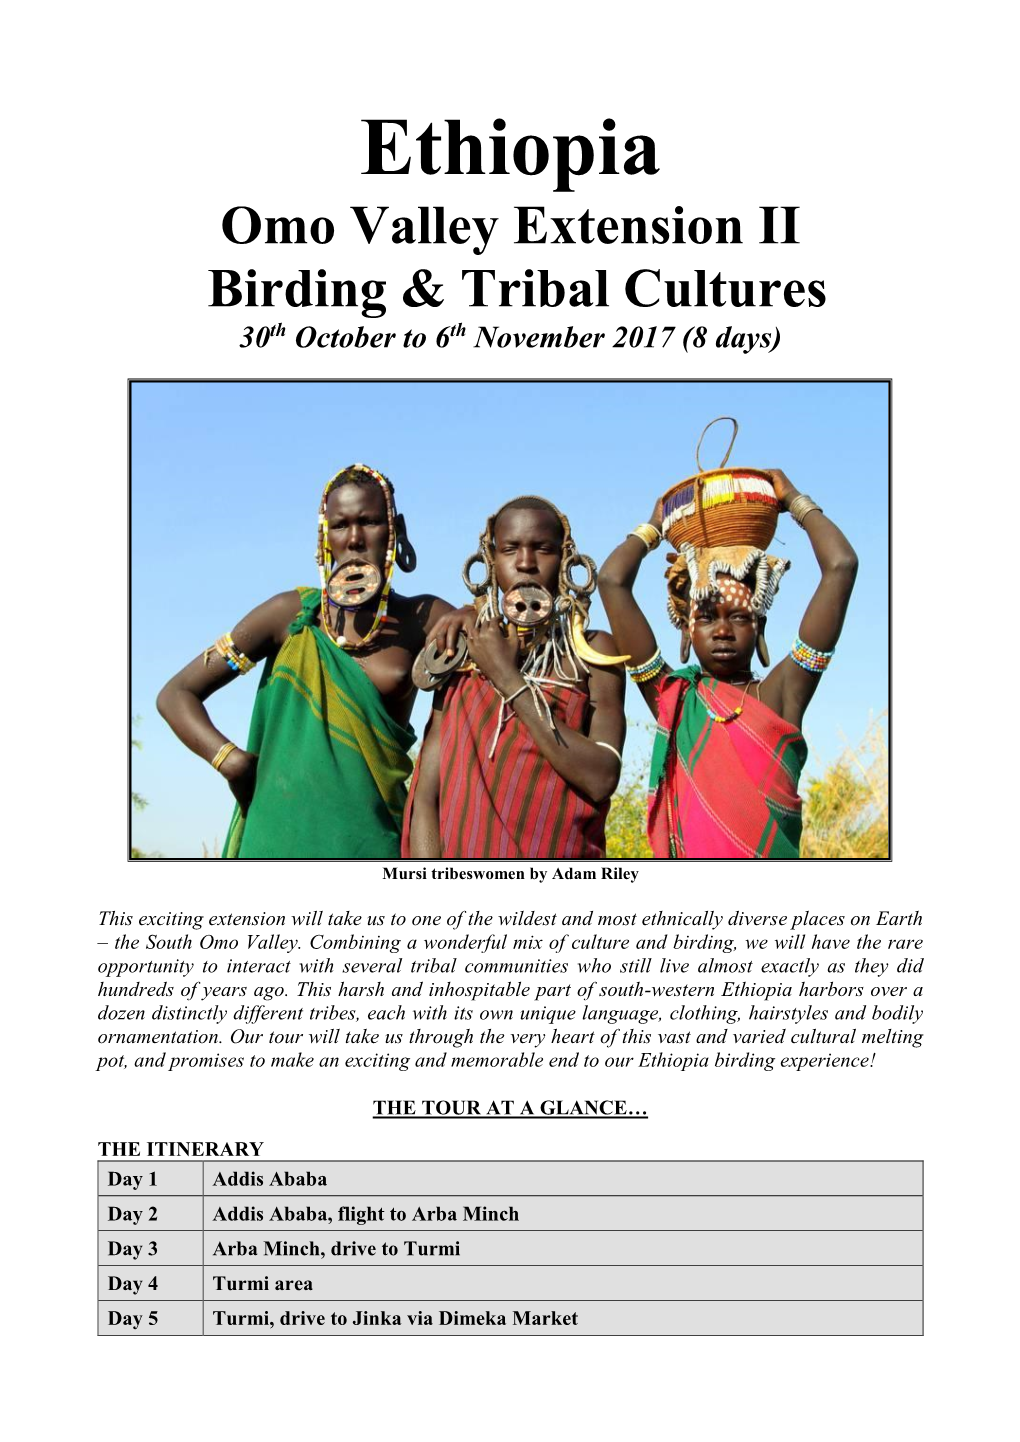 Ethiopia Omo Valley Extension II Birding & Tribal Cultures 30Th October to 6Th November 2017 (8 Days)